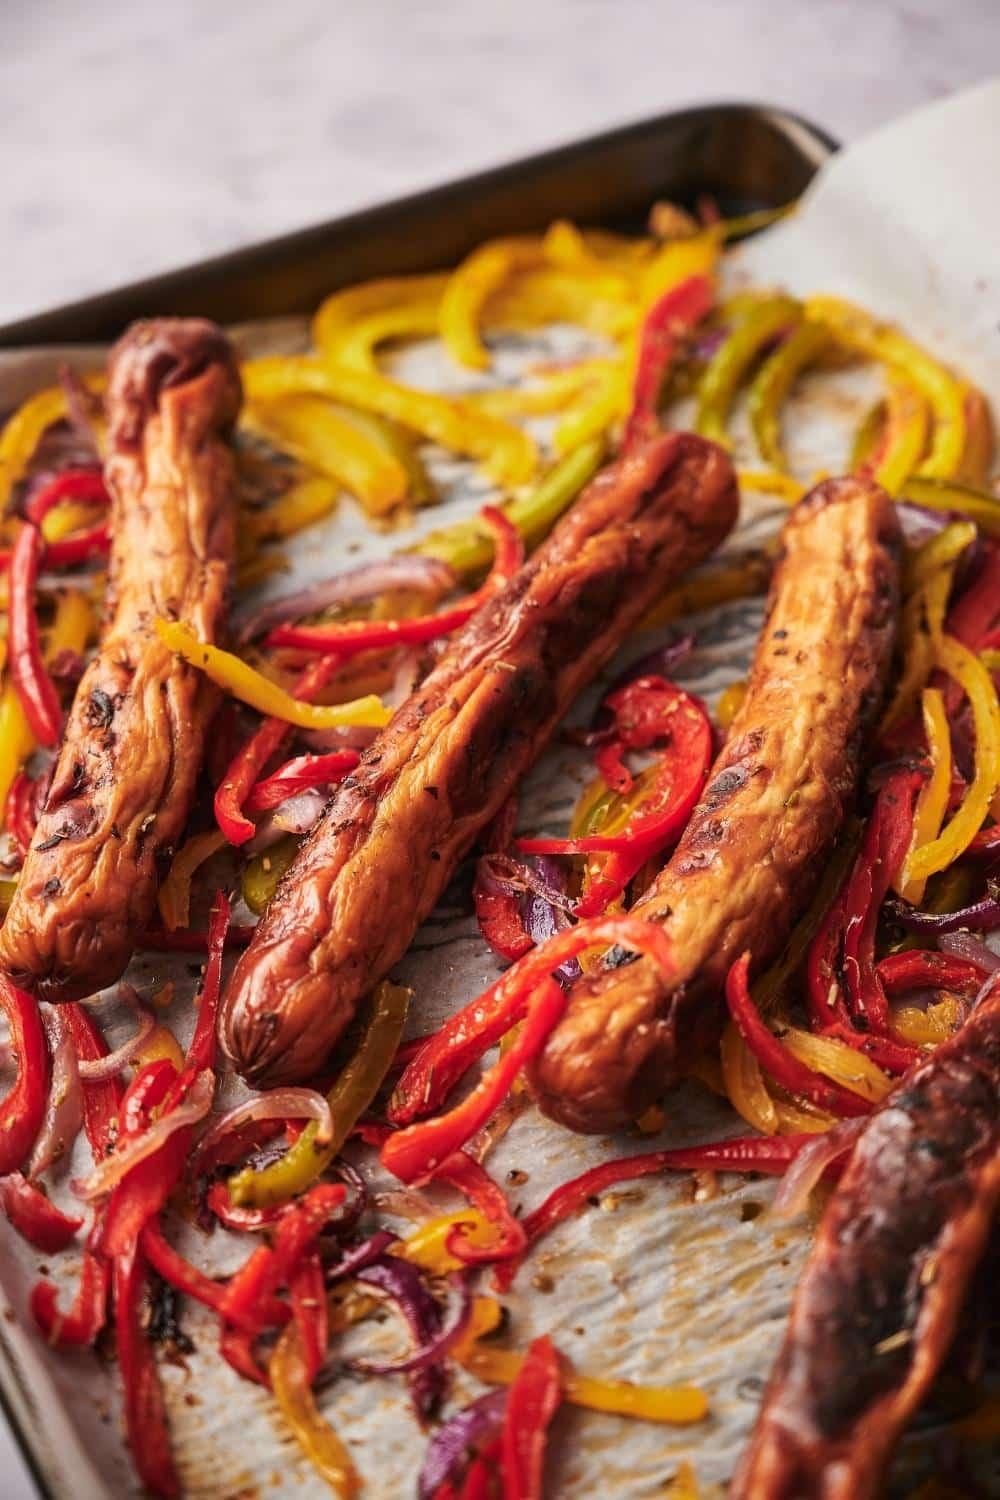 Roasted chicken sausages, peppers, and onions on a parchment paper lined tray set over a marble countertop.